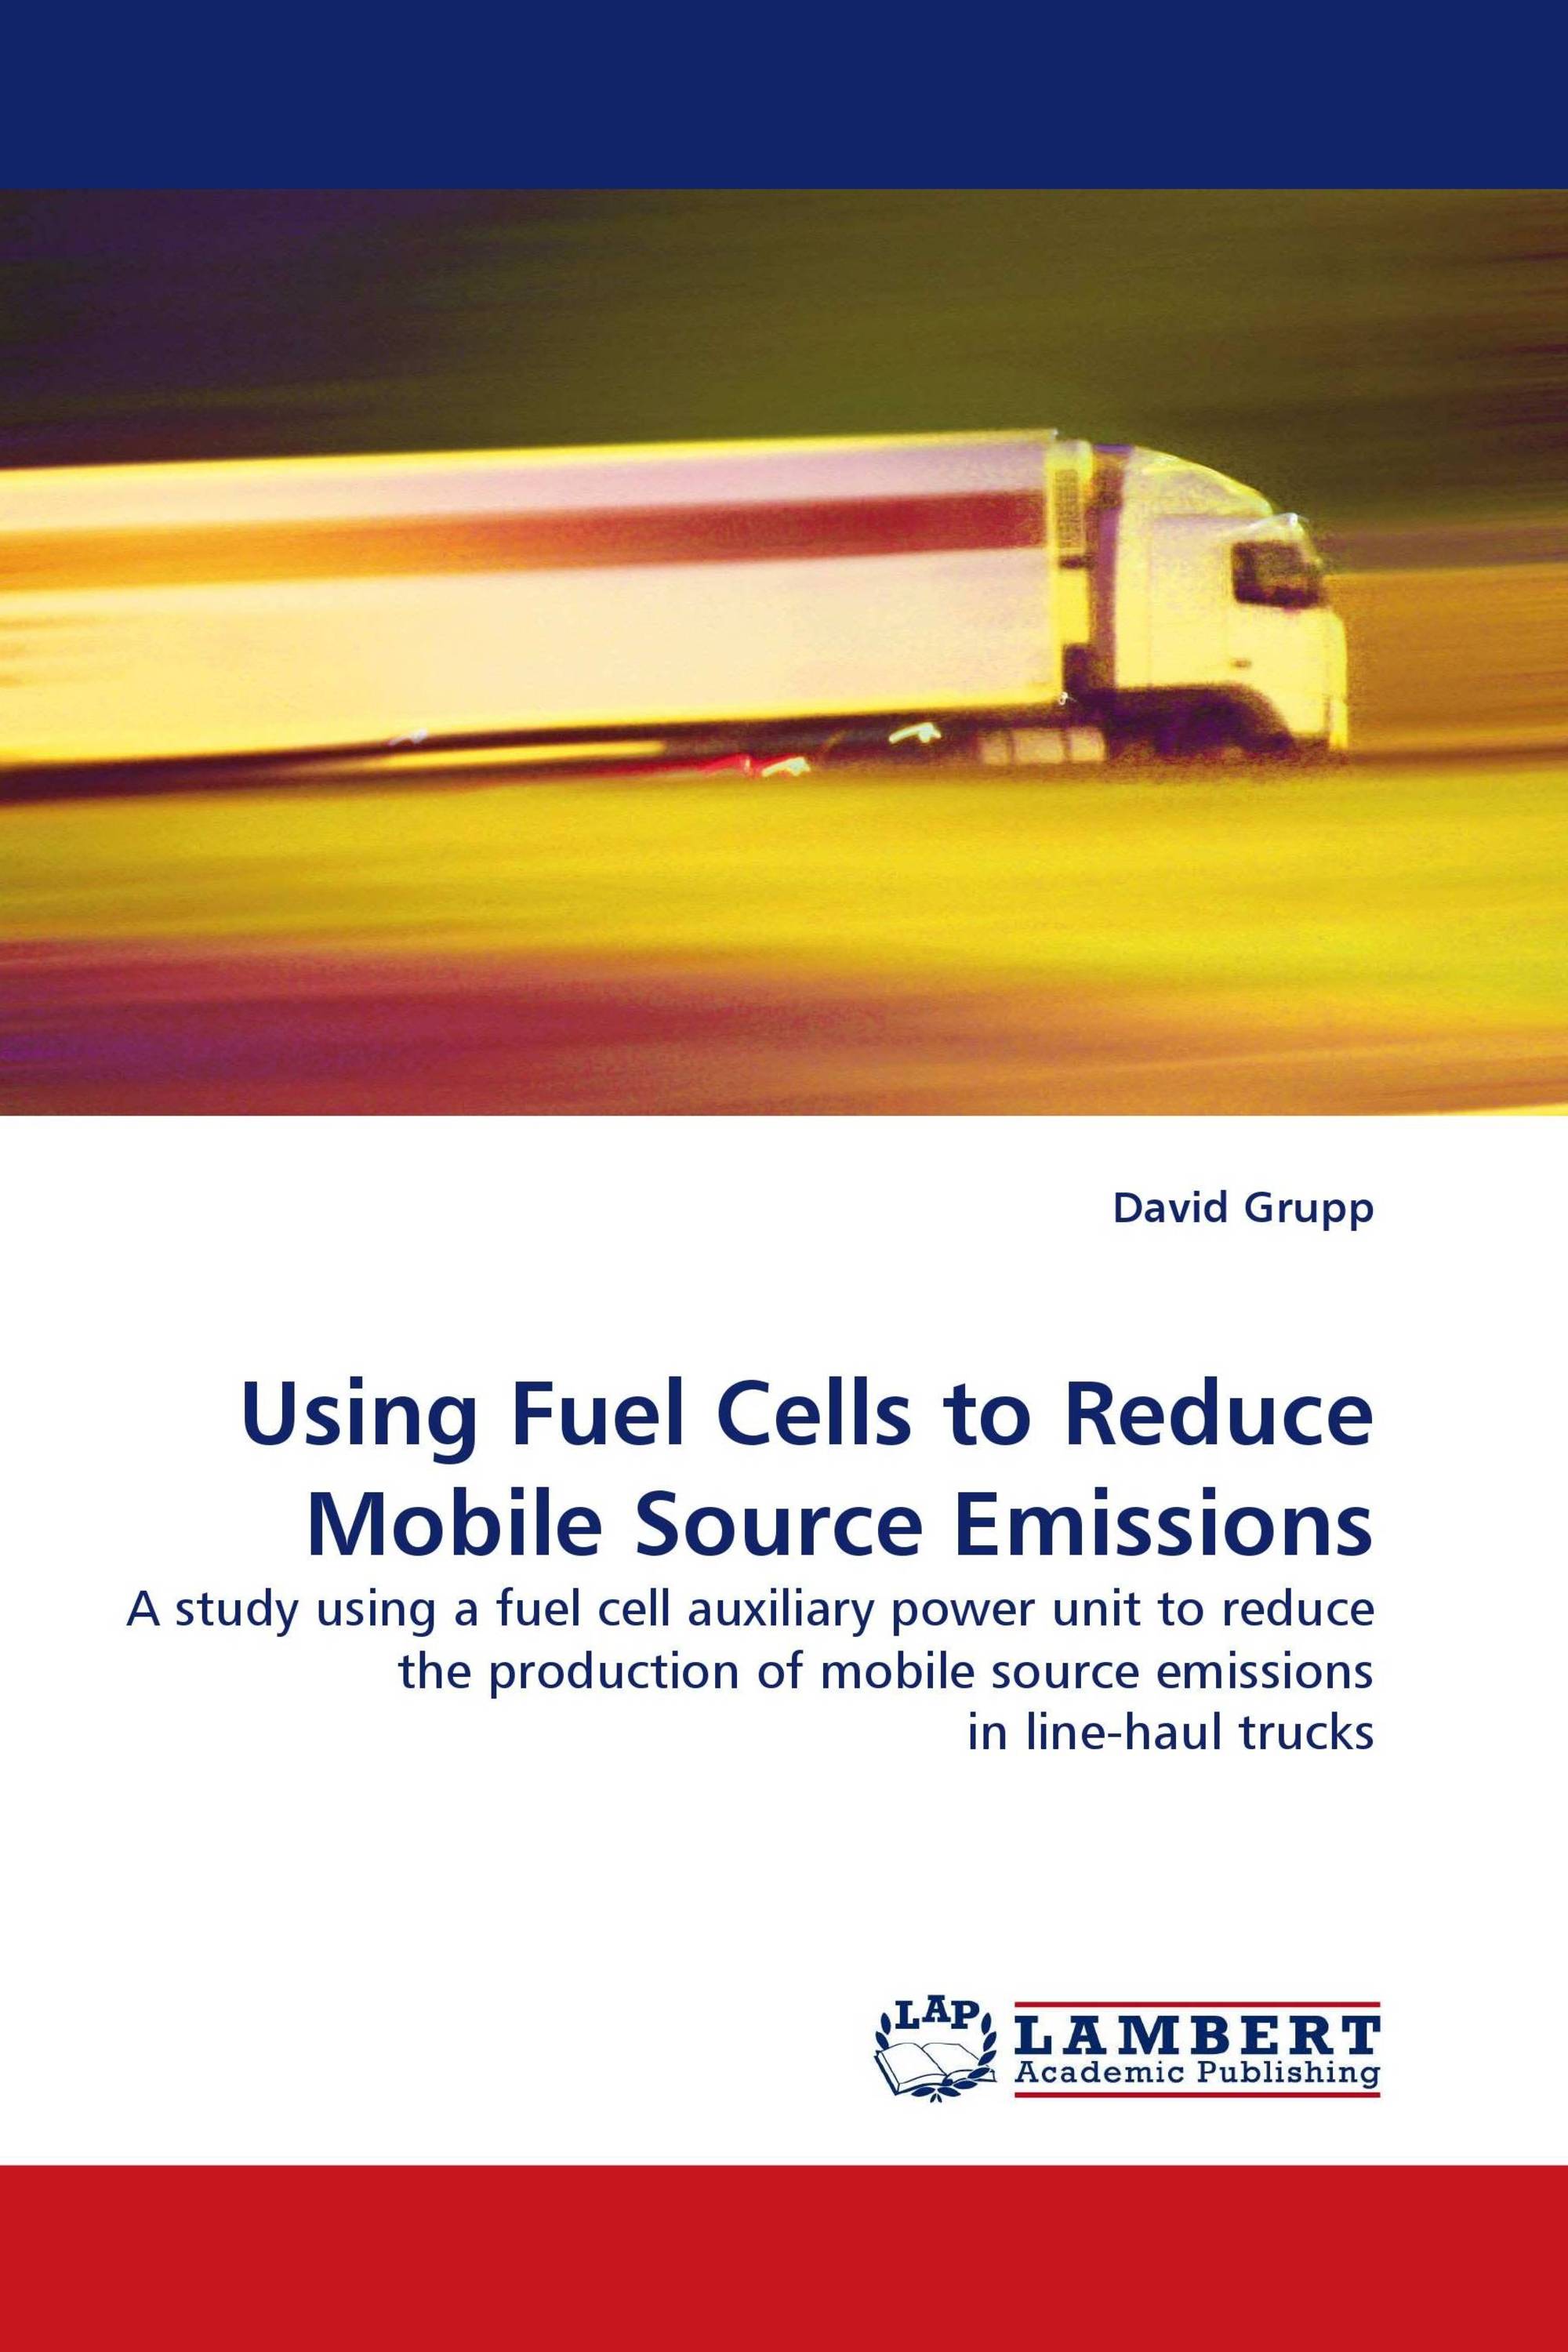 Using Fuel Cells to Reduce Mobile Source Emissions